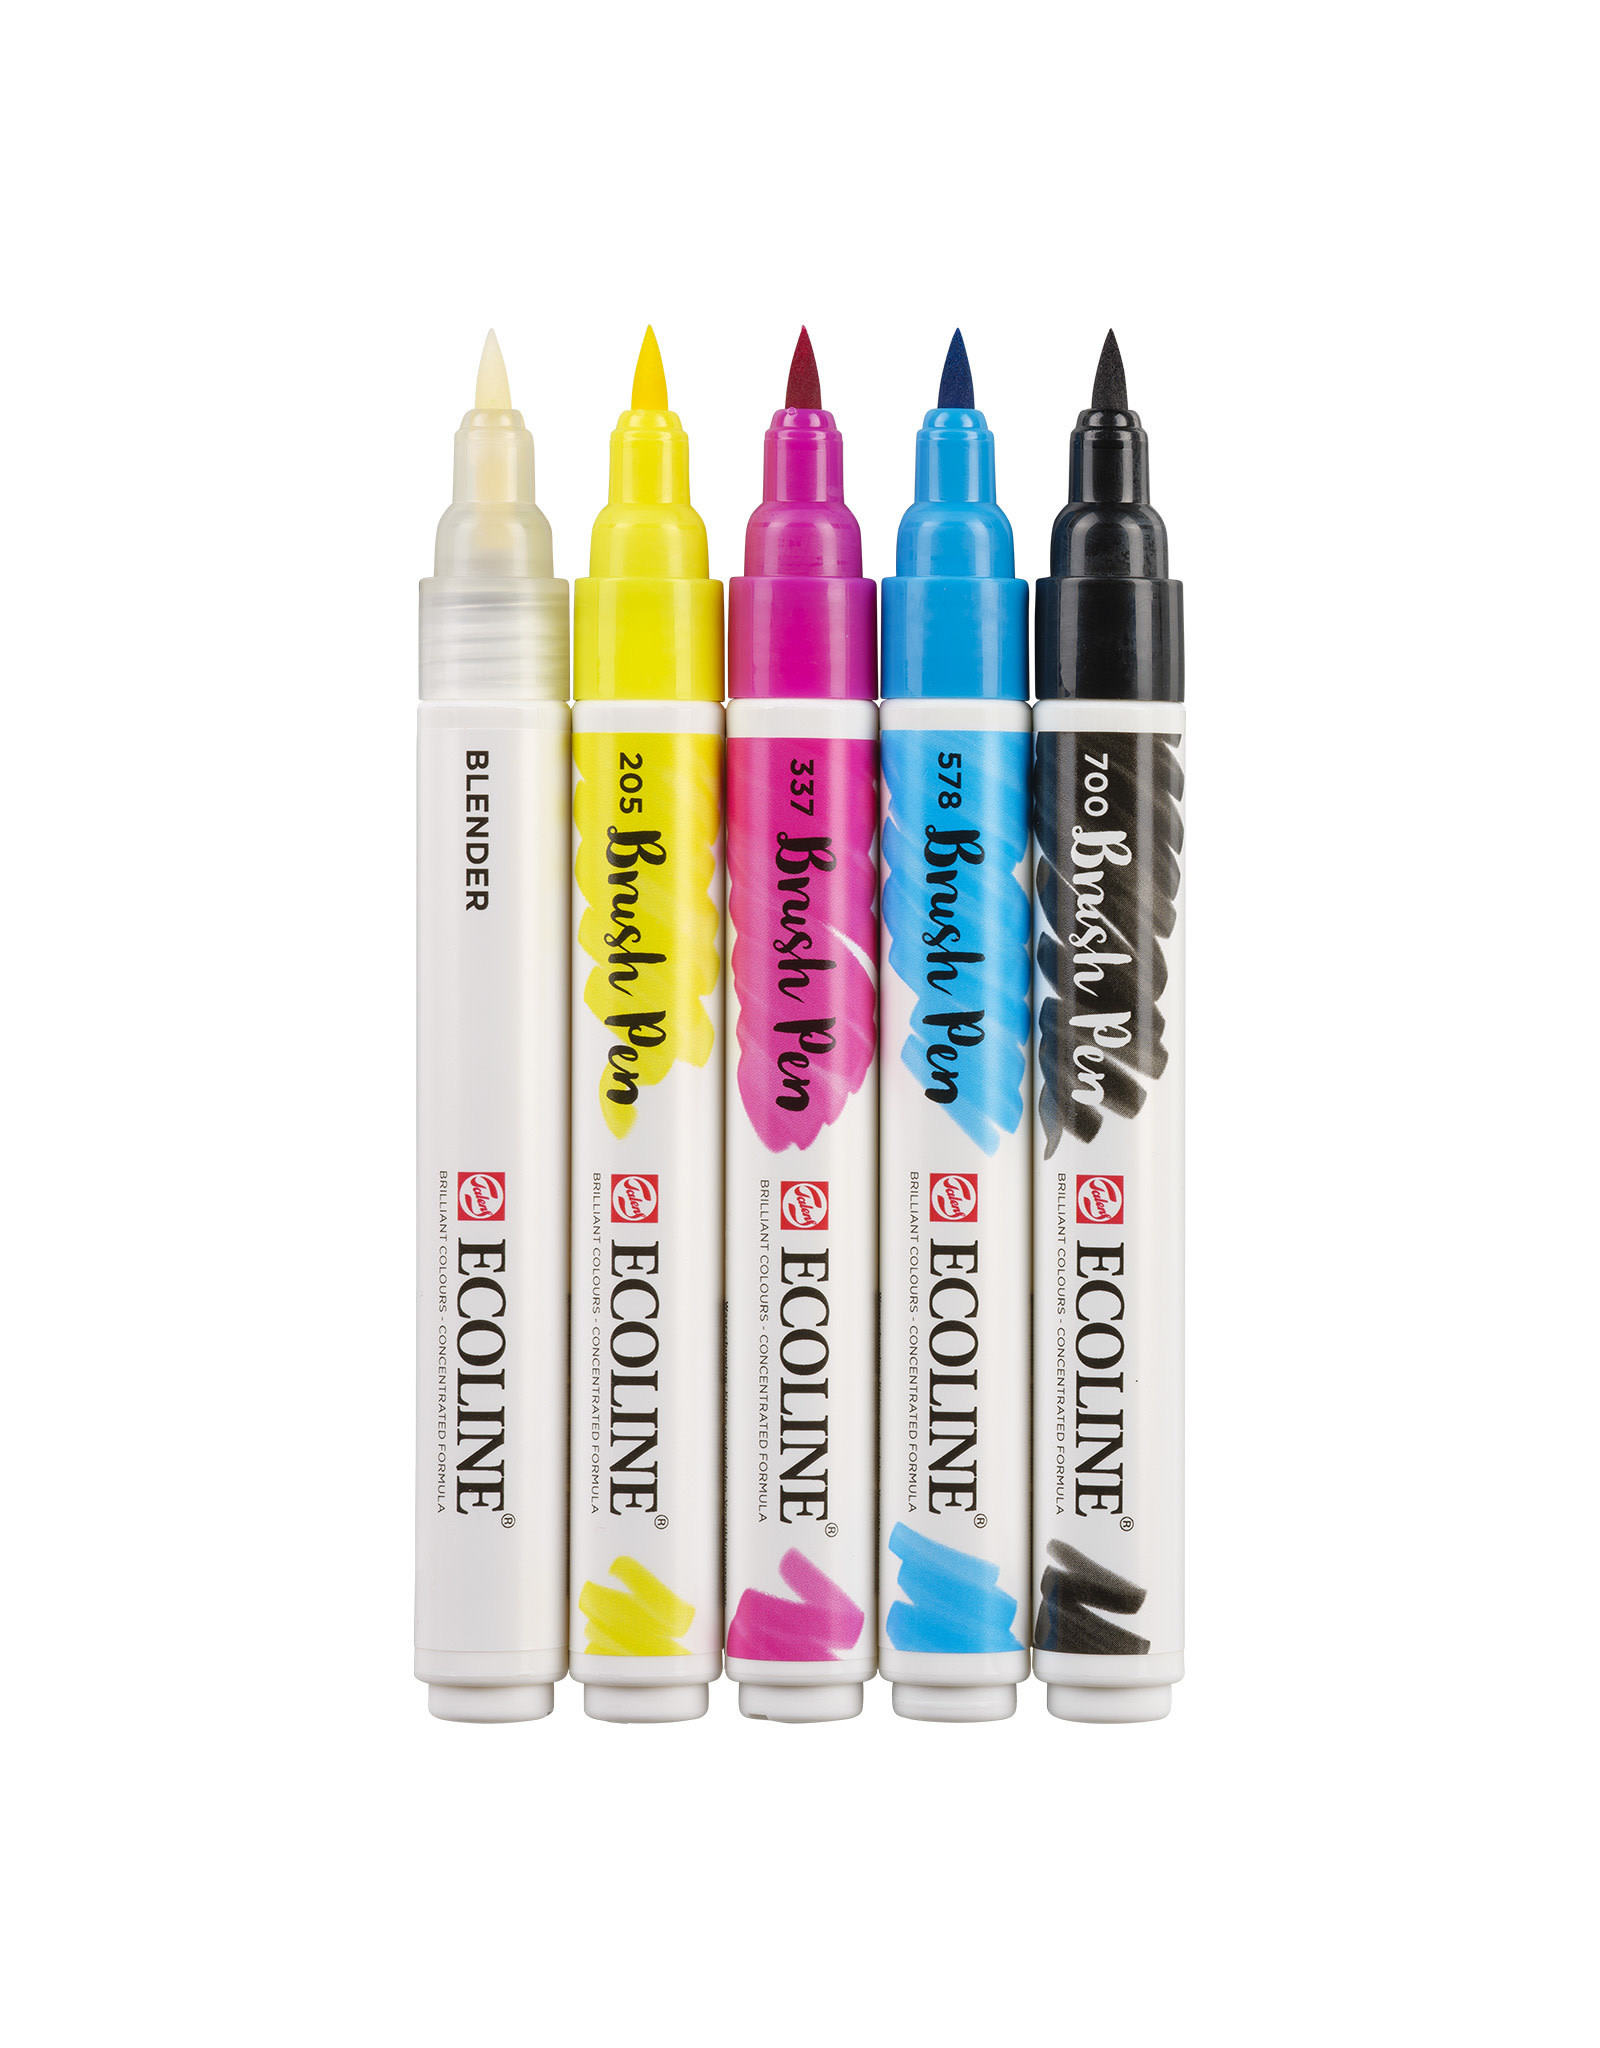 Royal Talens Ecoline Watercolour Brushpen, Primary Set of 5